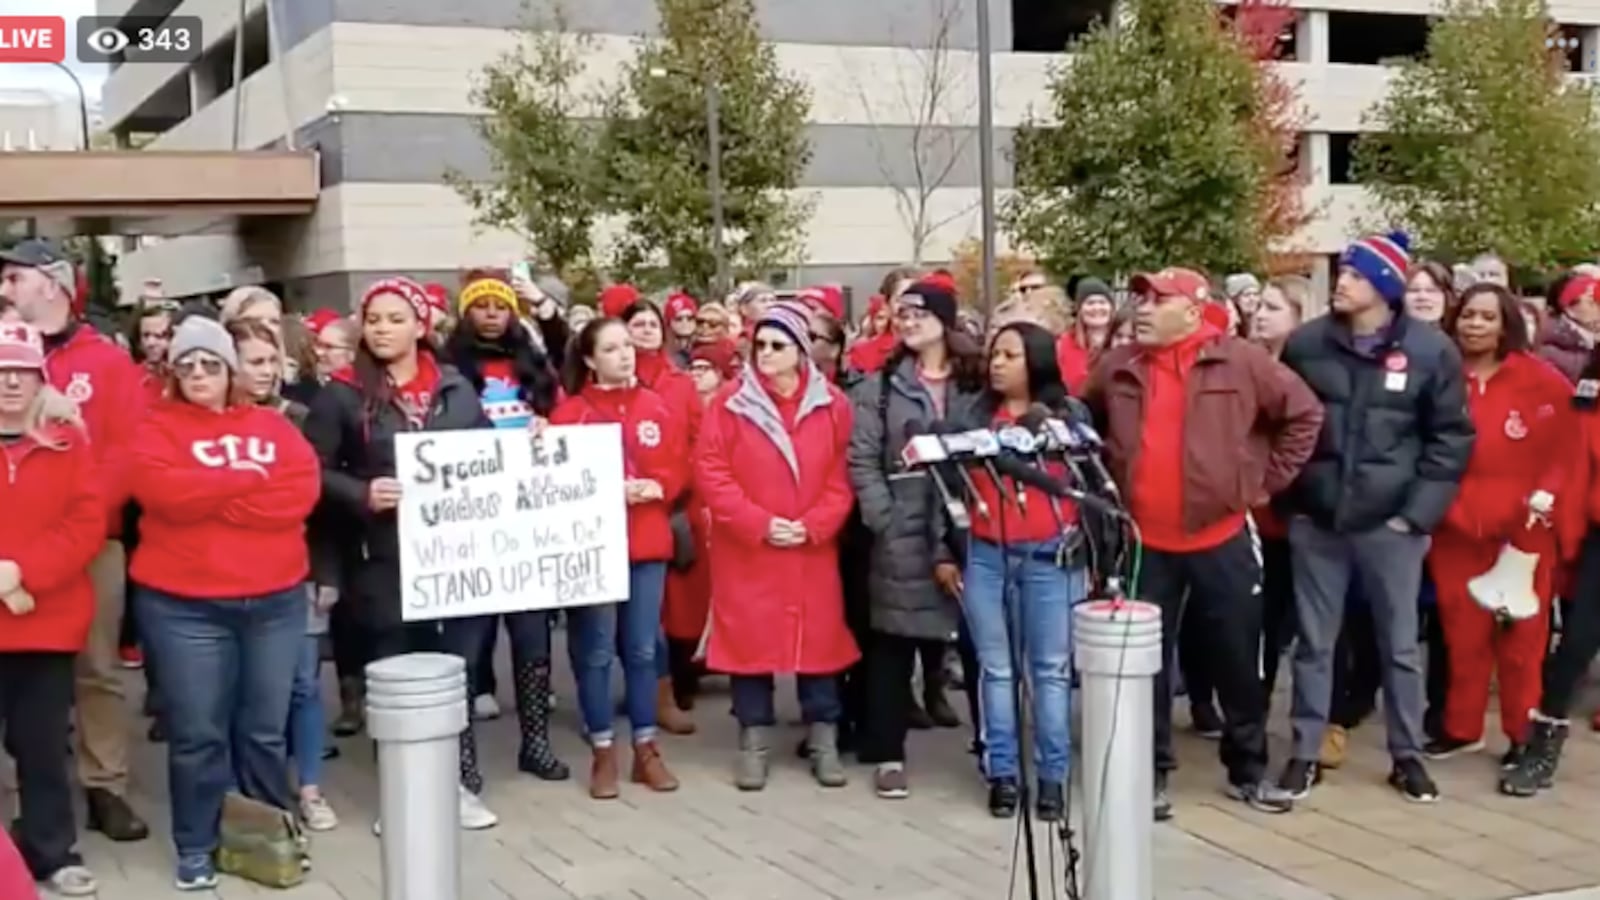 Special education teachers outlined their needs at a Chicago Teachers Union press conference, Oct. 24, 2019.